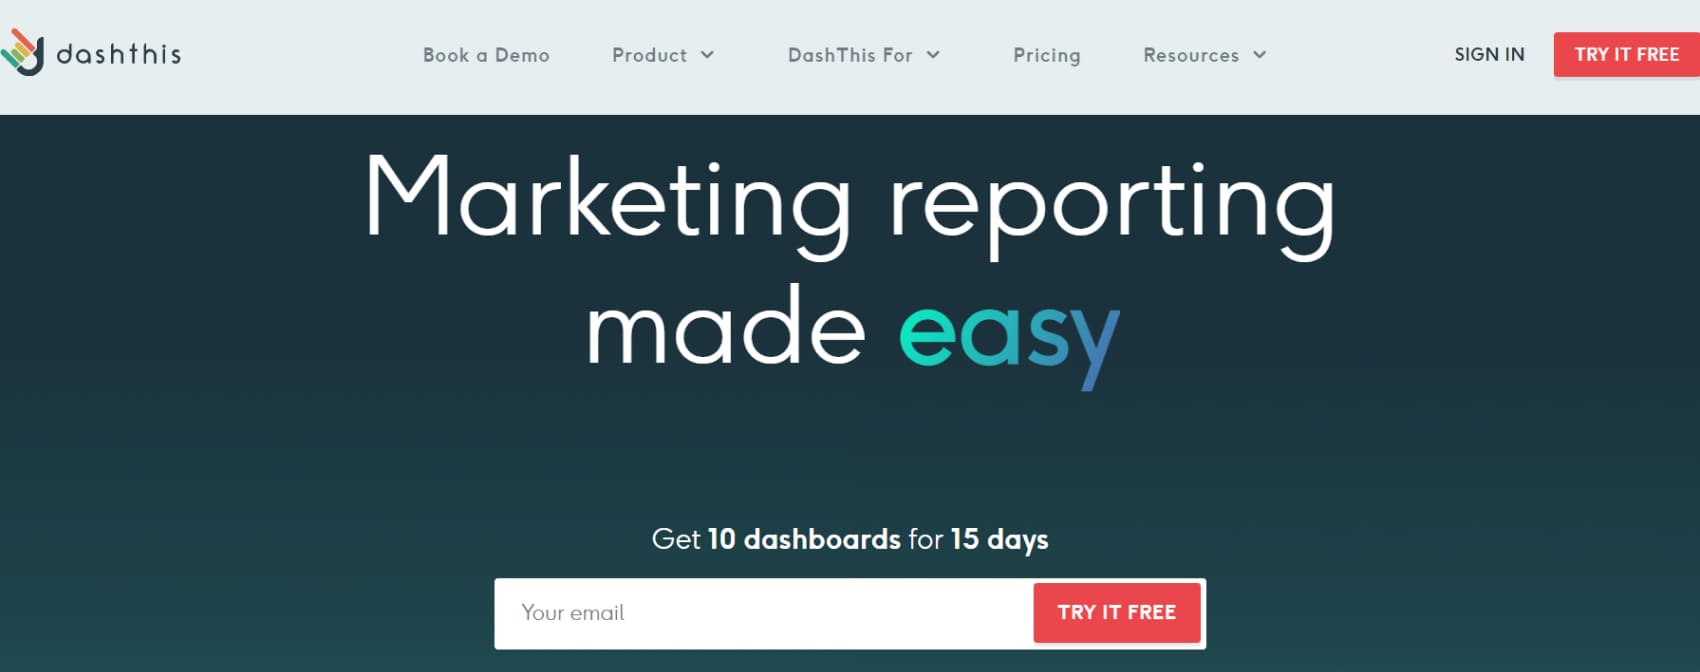 DashThis is one of the tools for inbound marketing